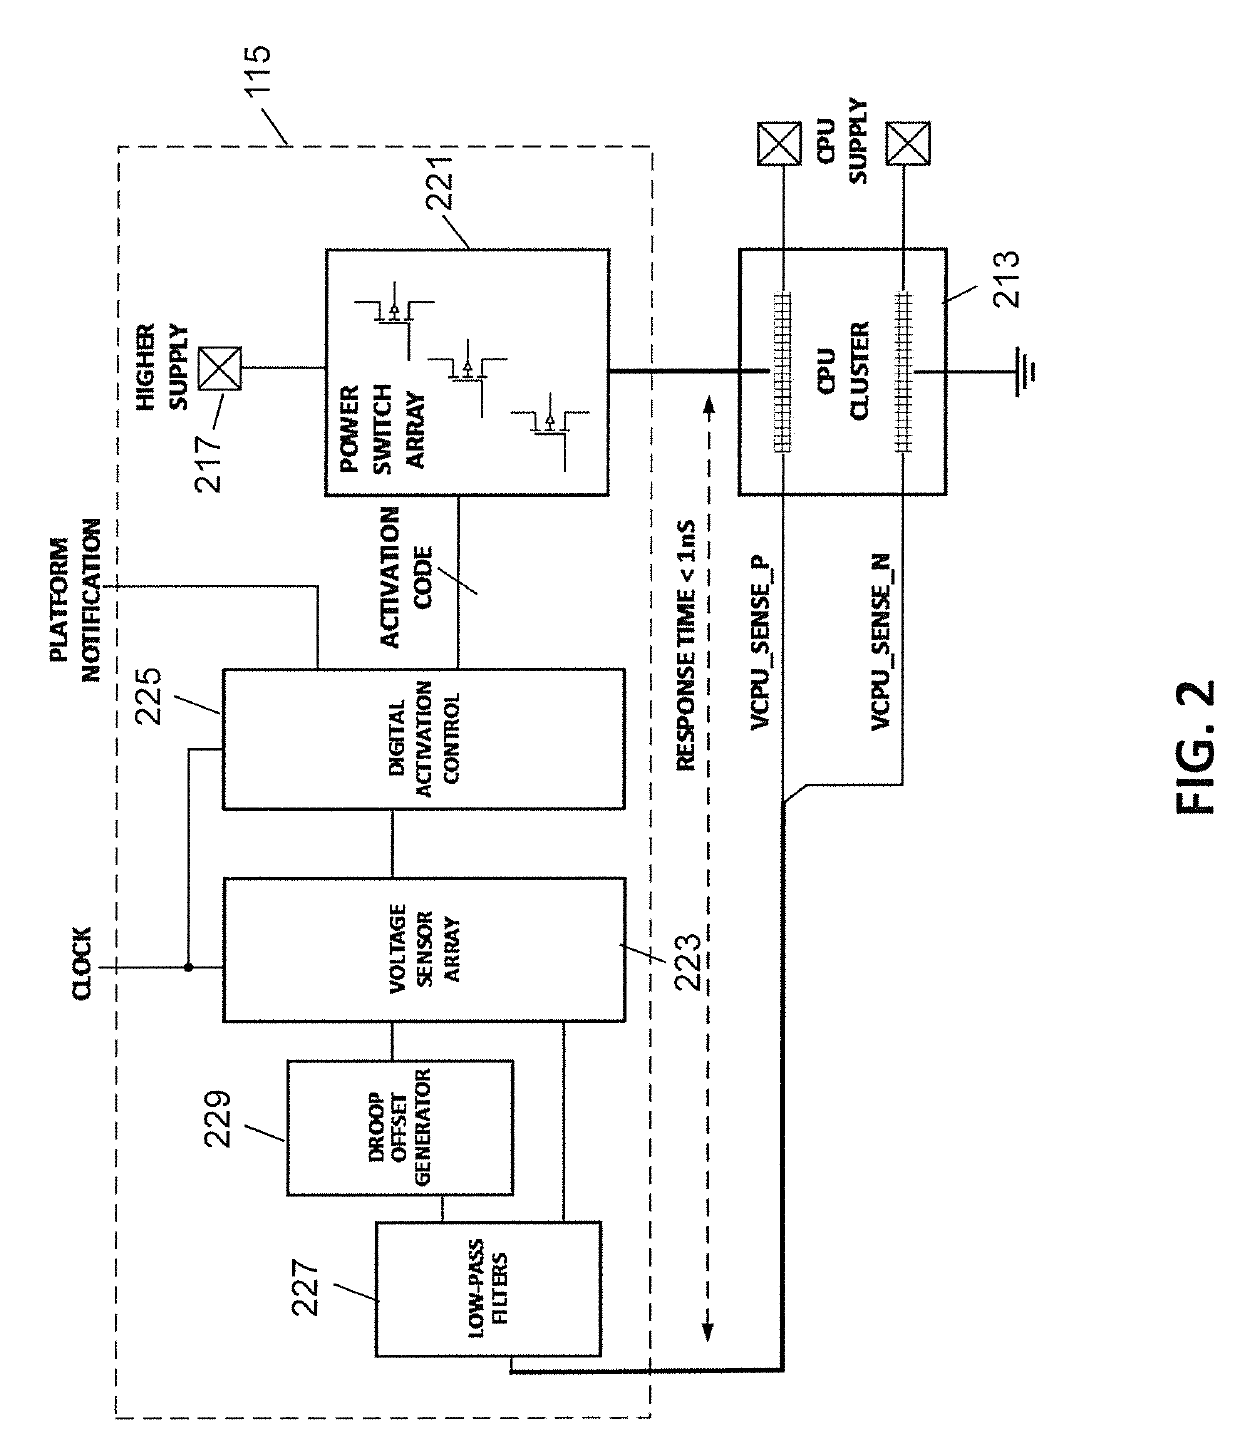 Method and apparatus for improving integrity of processor voltage supply with support for dvfs